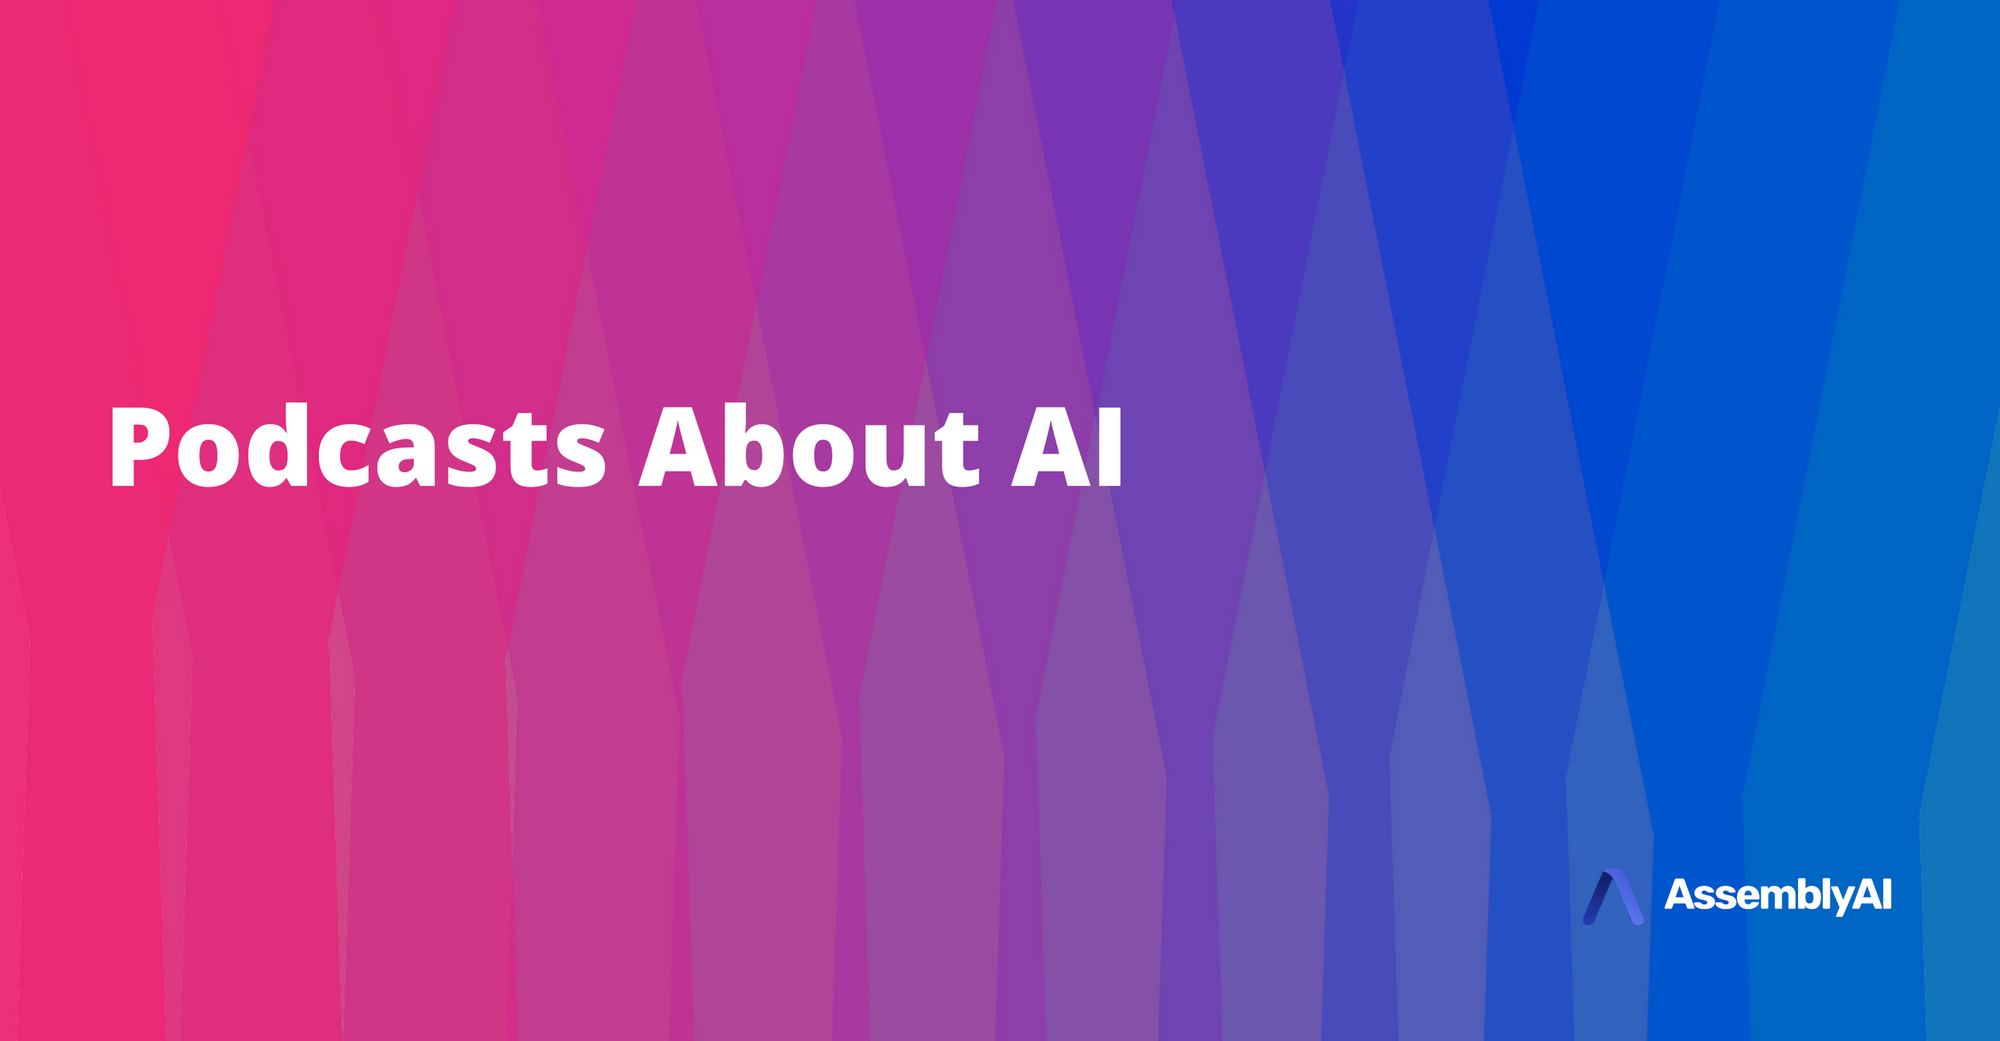 Podcasts About AI - Our Deep Learning Team’s Top Picks